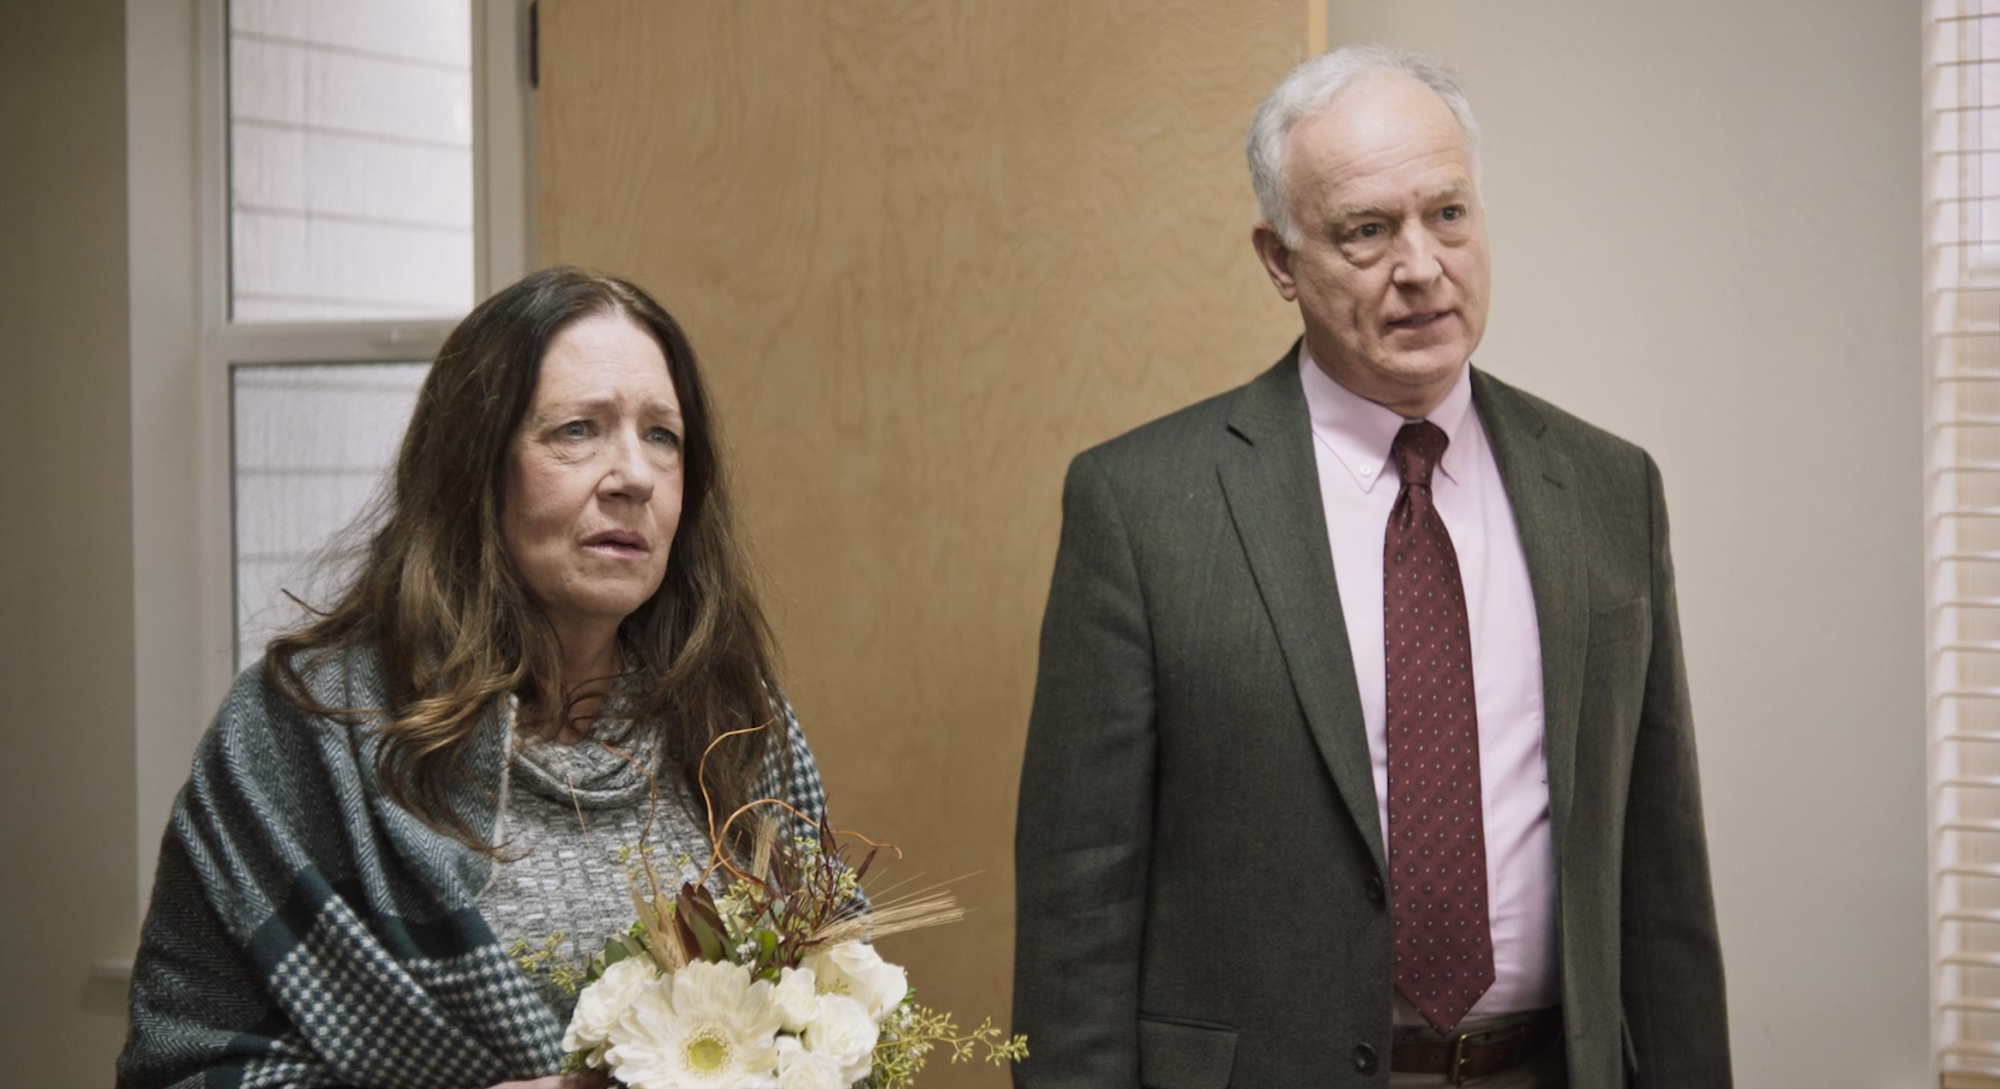 Ann Dowd and Reed Birney play the parents of a school shooting perpetrator in "Mass."